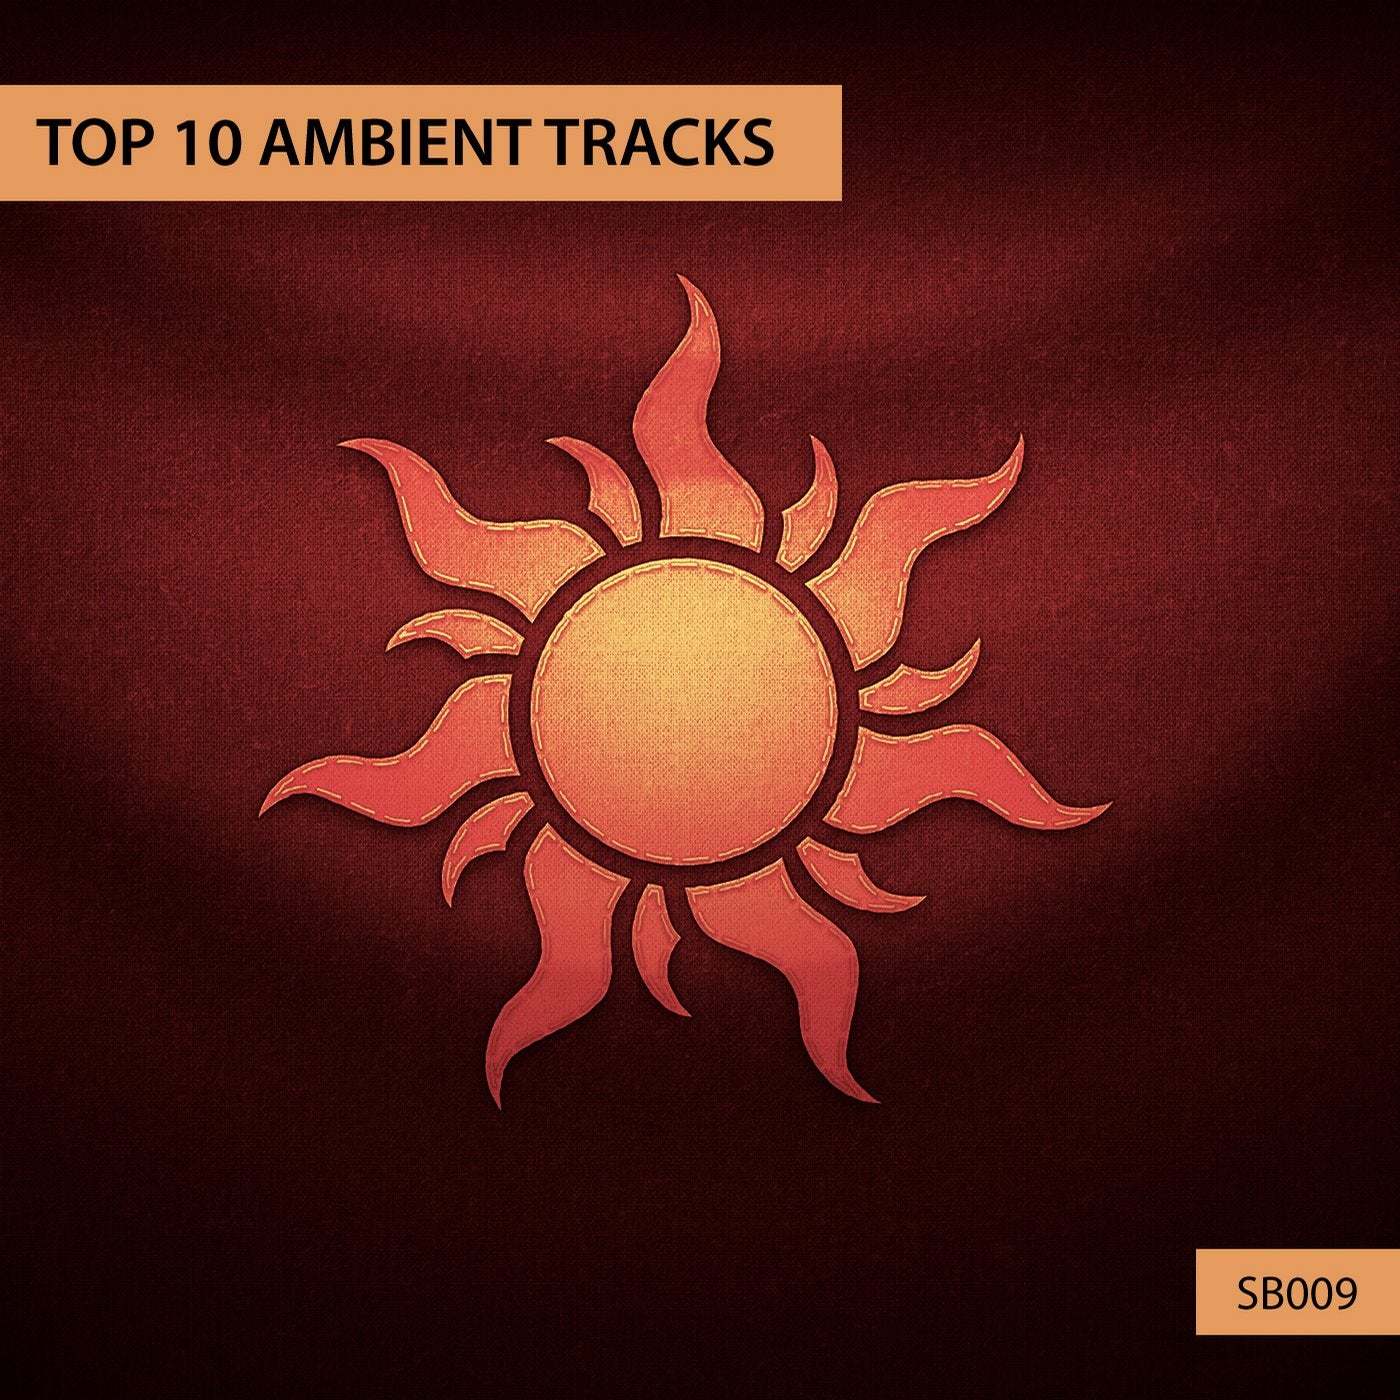 Top 10 Ambient Tracks